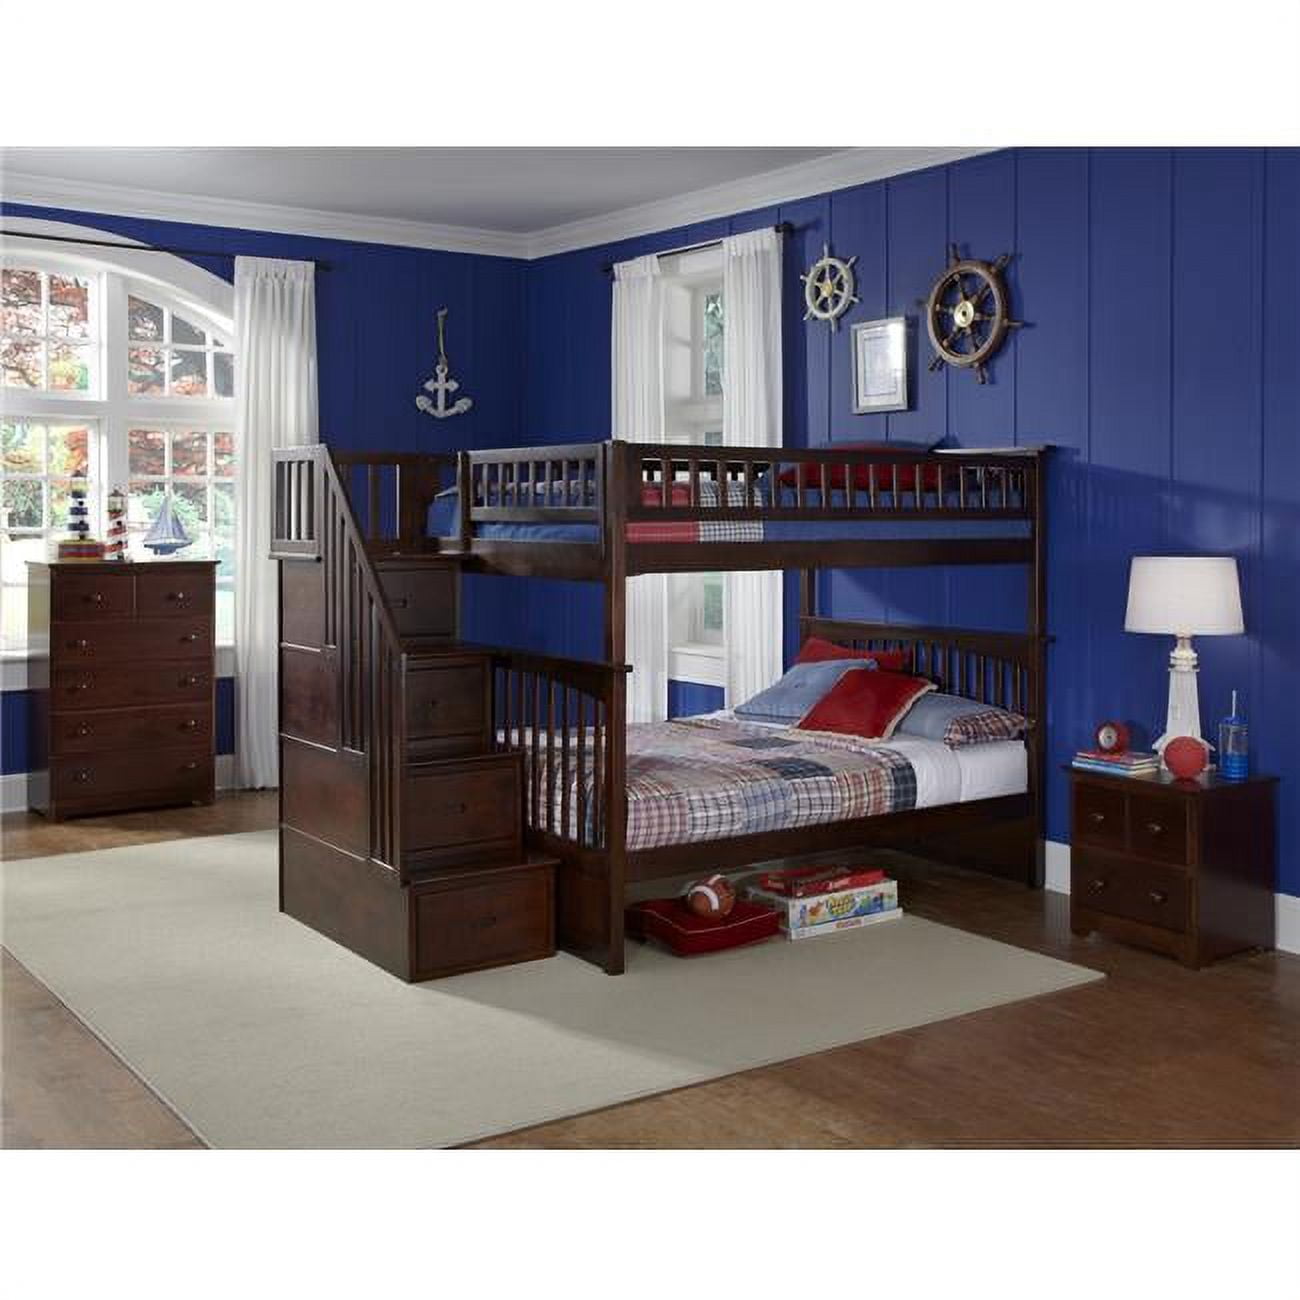 Ab55844 Columbia Staircase Bunkbed With Urban Bed Drawers - Antique Walnut, Full Over Full Size